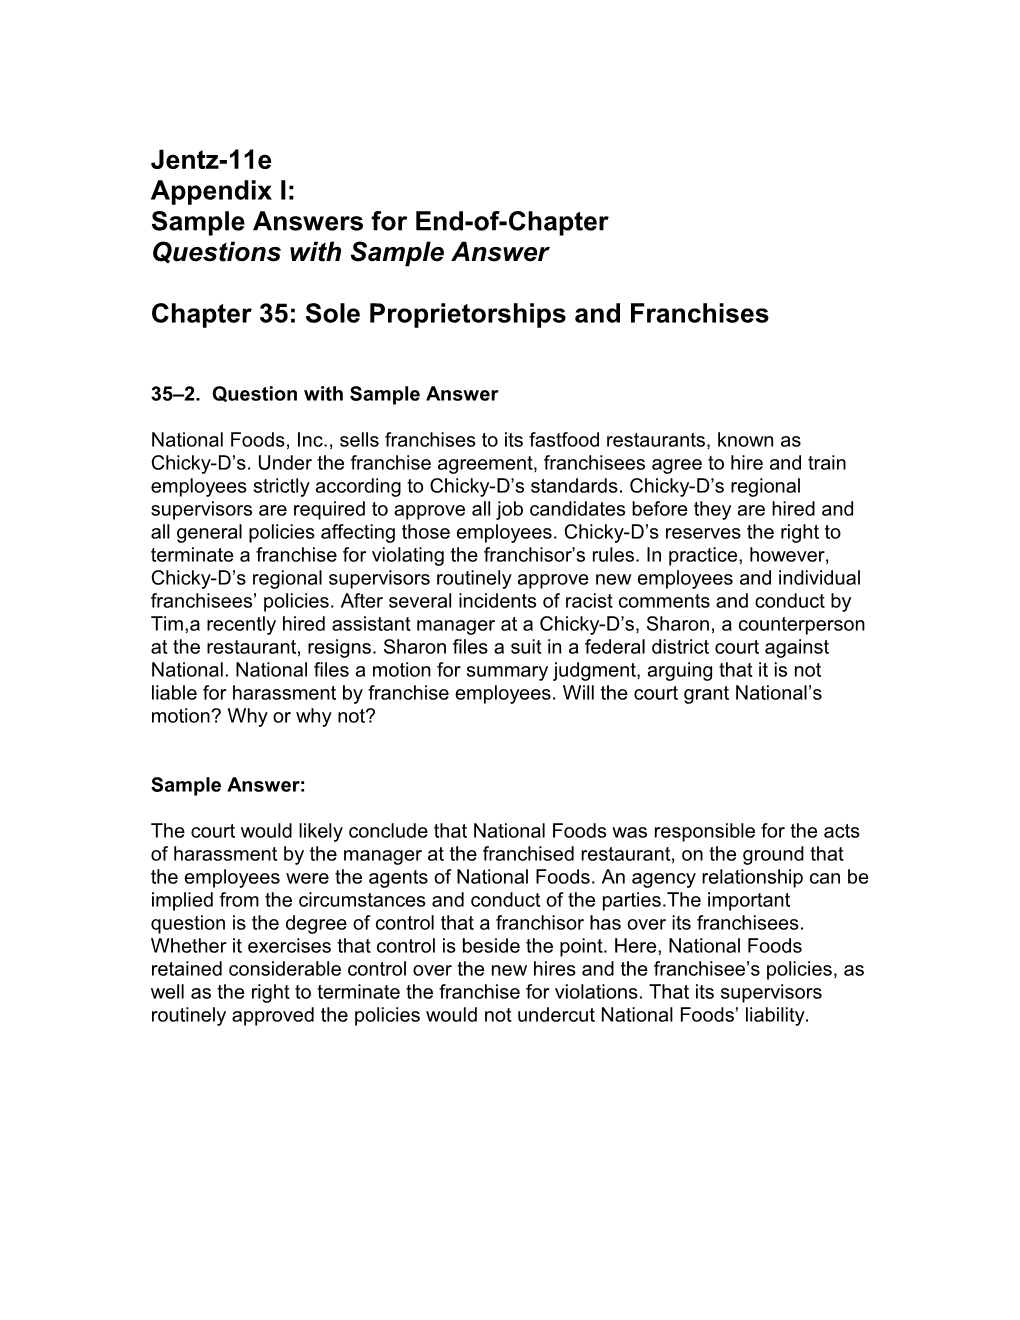 Chapter 4 - Constitutional Authority to Regulate Business s12